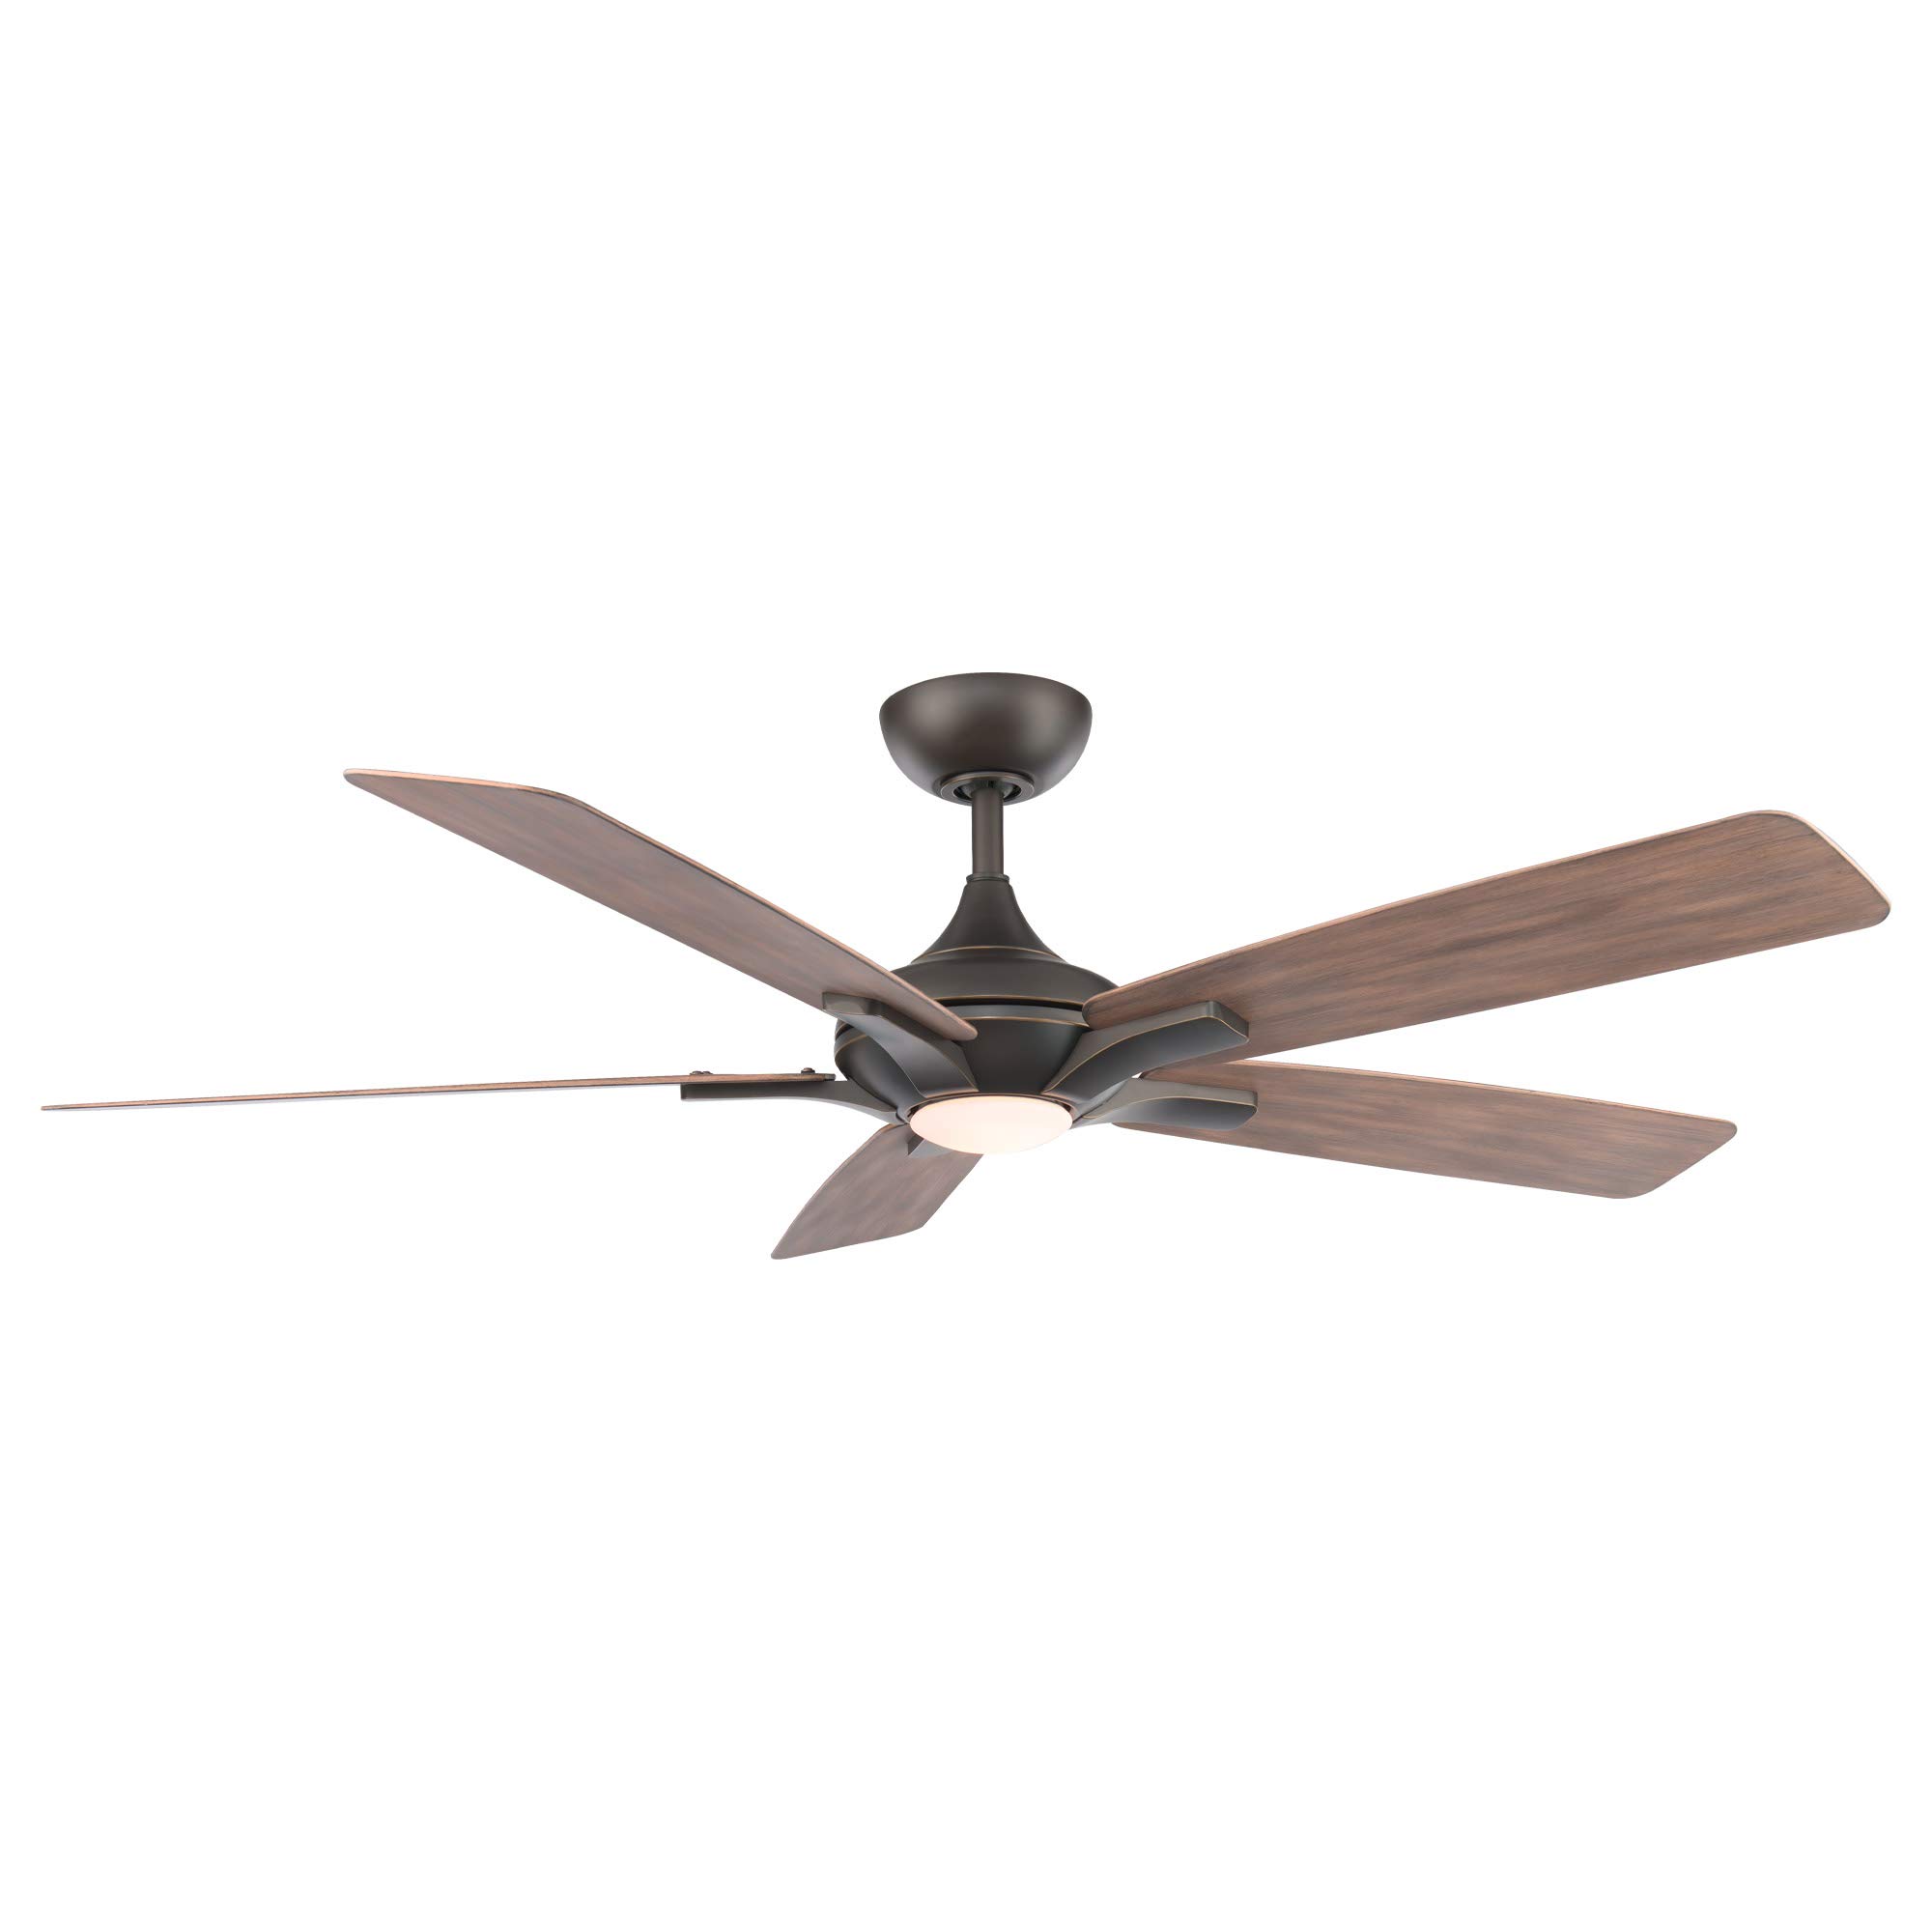 Mykonos Smart Indoor and Outdoor 5-Blade Ceiling Fan 60in Oil Rubbed Bronze Barn Wood with 3000K LED Light Kit and Remote Control works with Alexa, Google Assistant, Samsung Things, and iOS or Android App